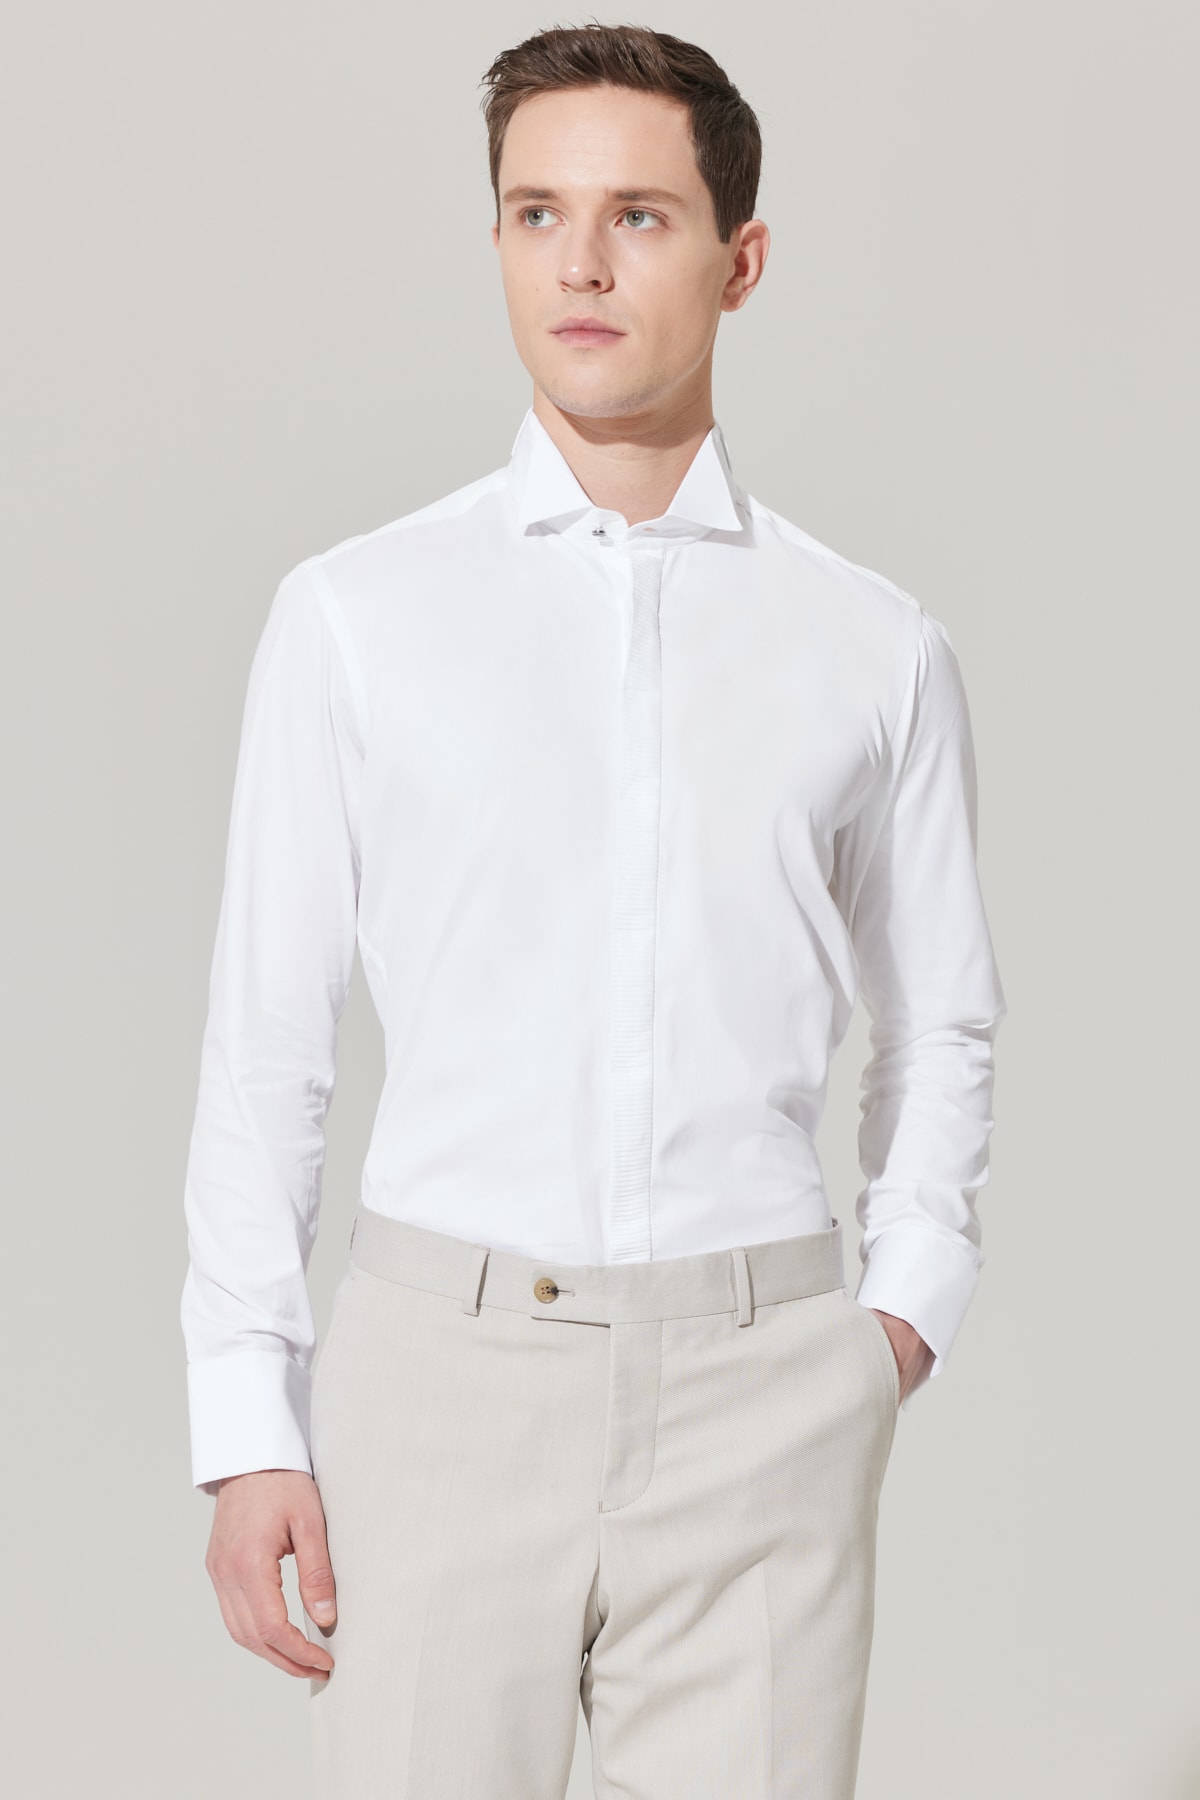 Levně ALTINYILDIZ CLASSICS Men's White Shirt with Wrinkle-Free Fabric, Slim Fit, Fitted Fit 100% Cotton, Black Detailed, Collar Collar.